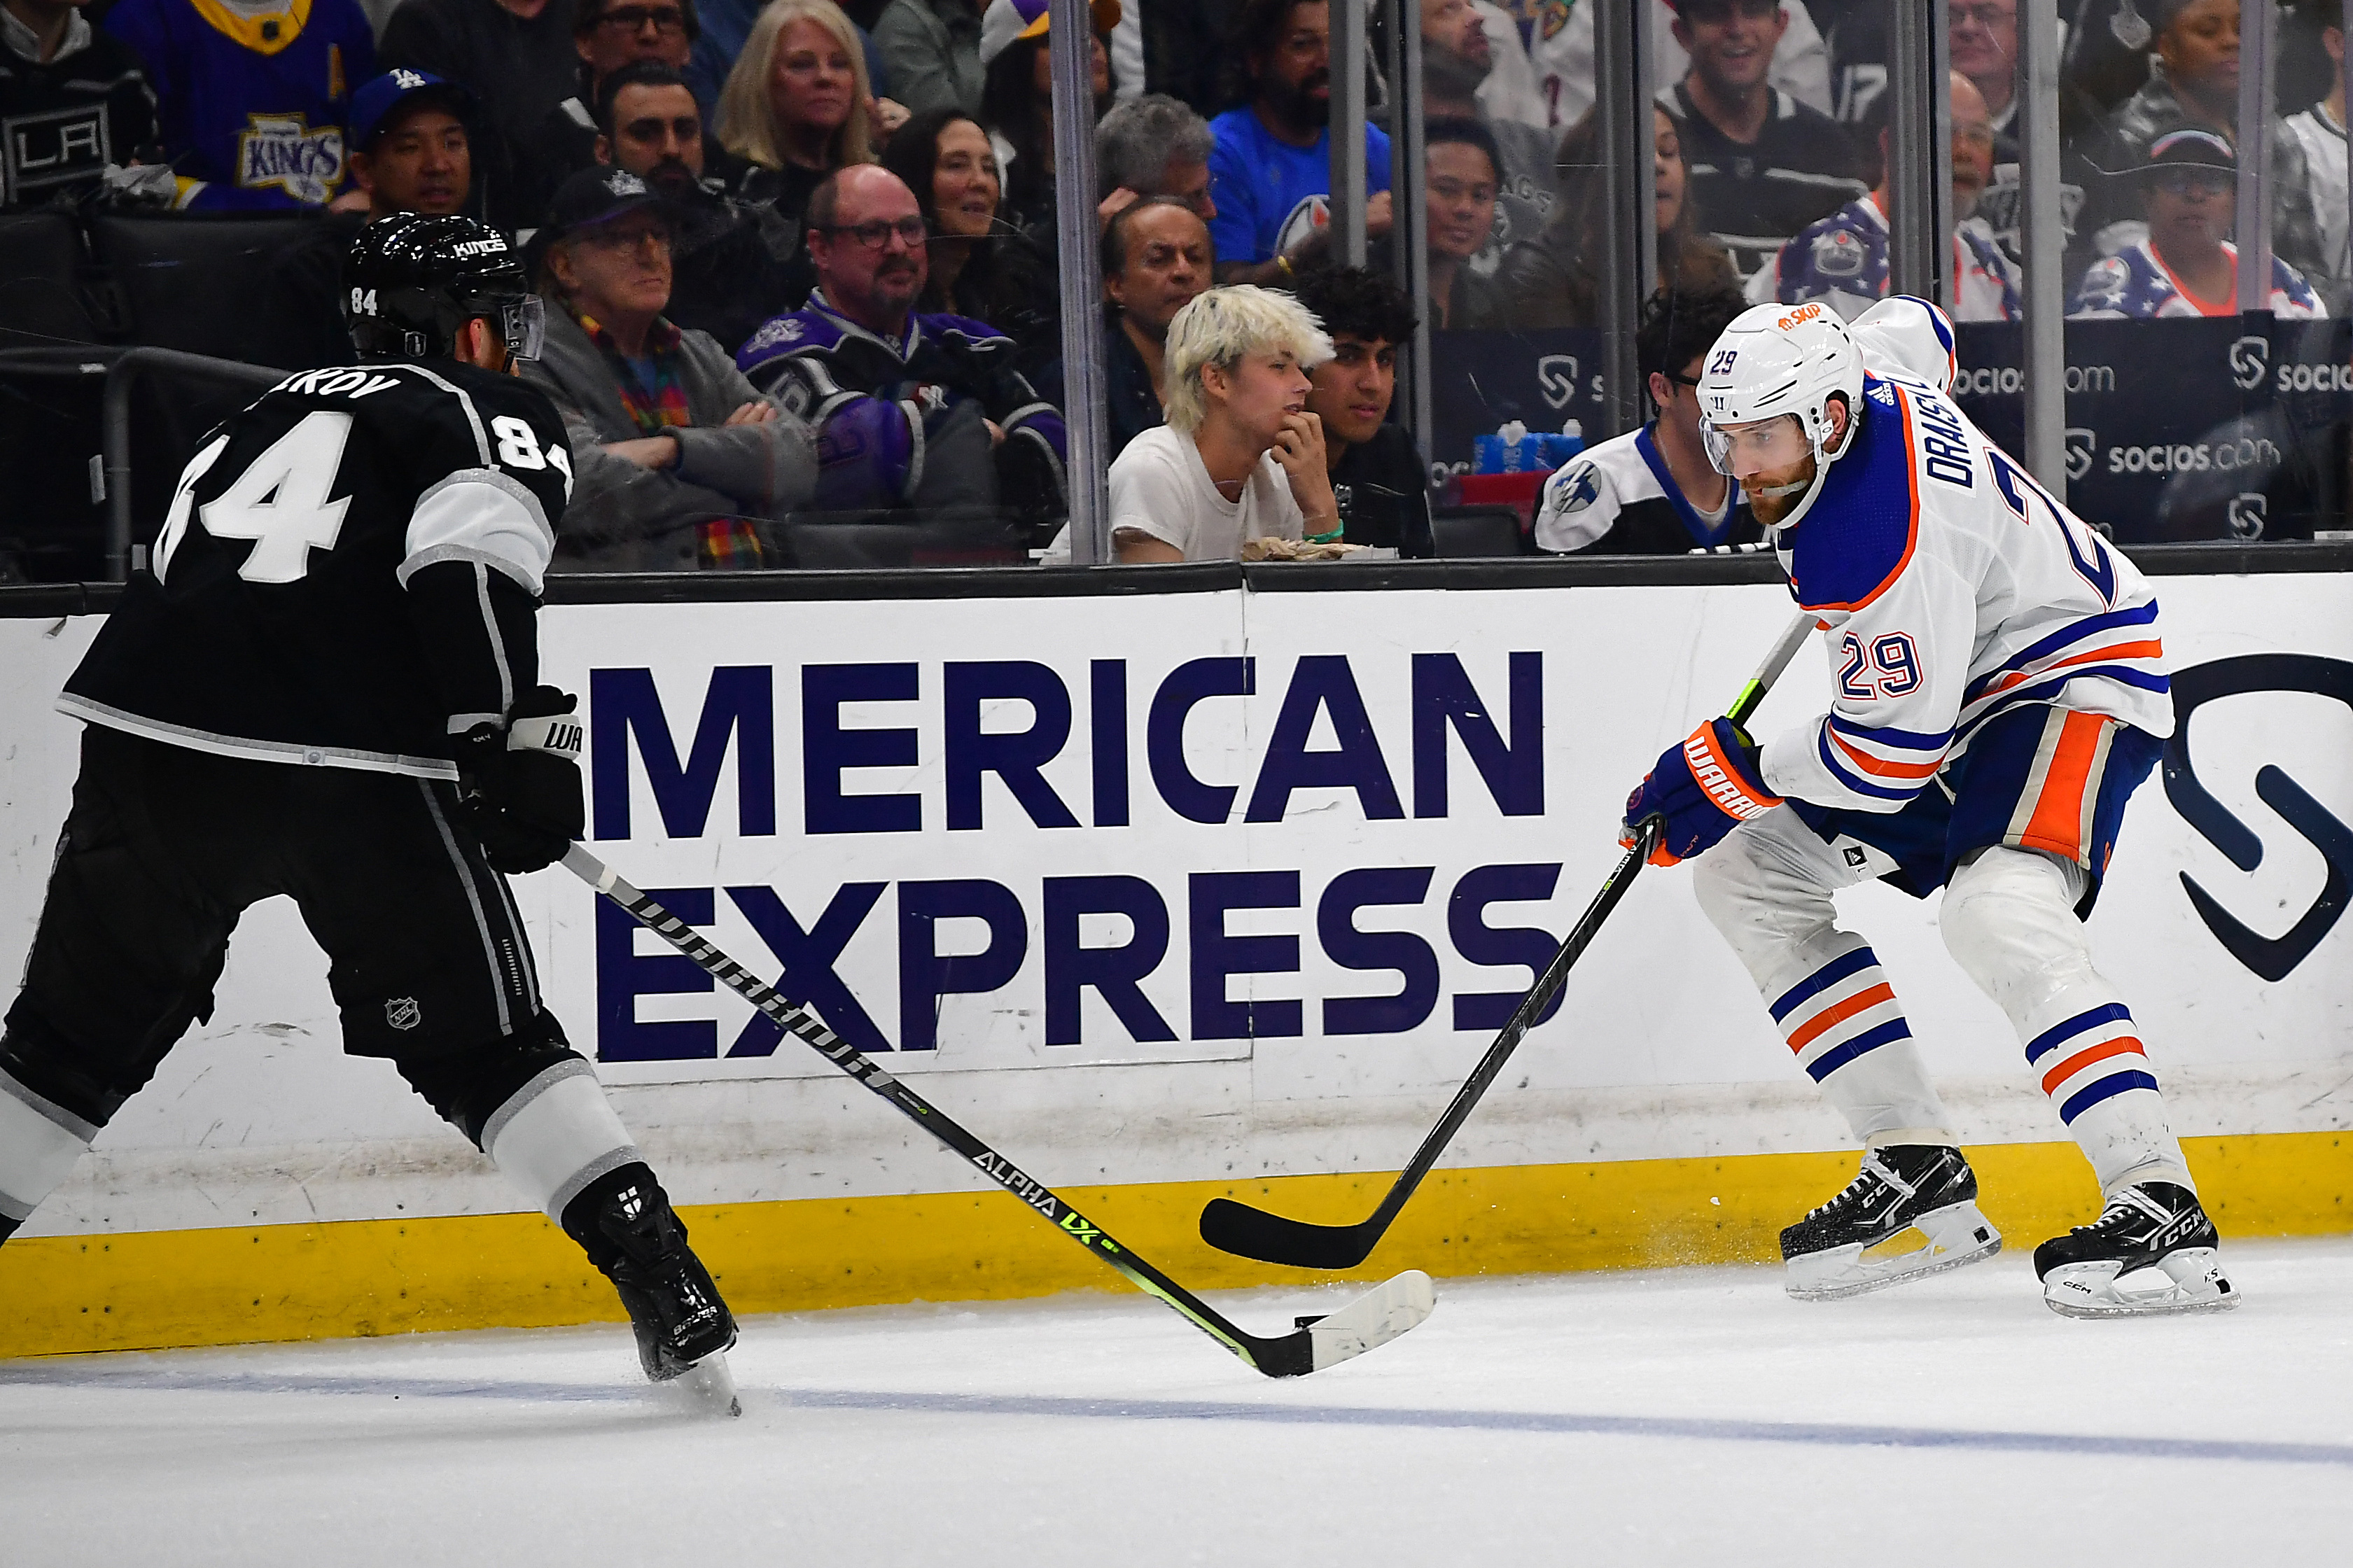 Kings clinch Stanley Cup with double OT win over Rangers